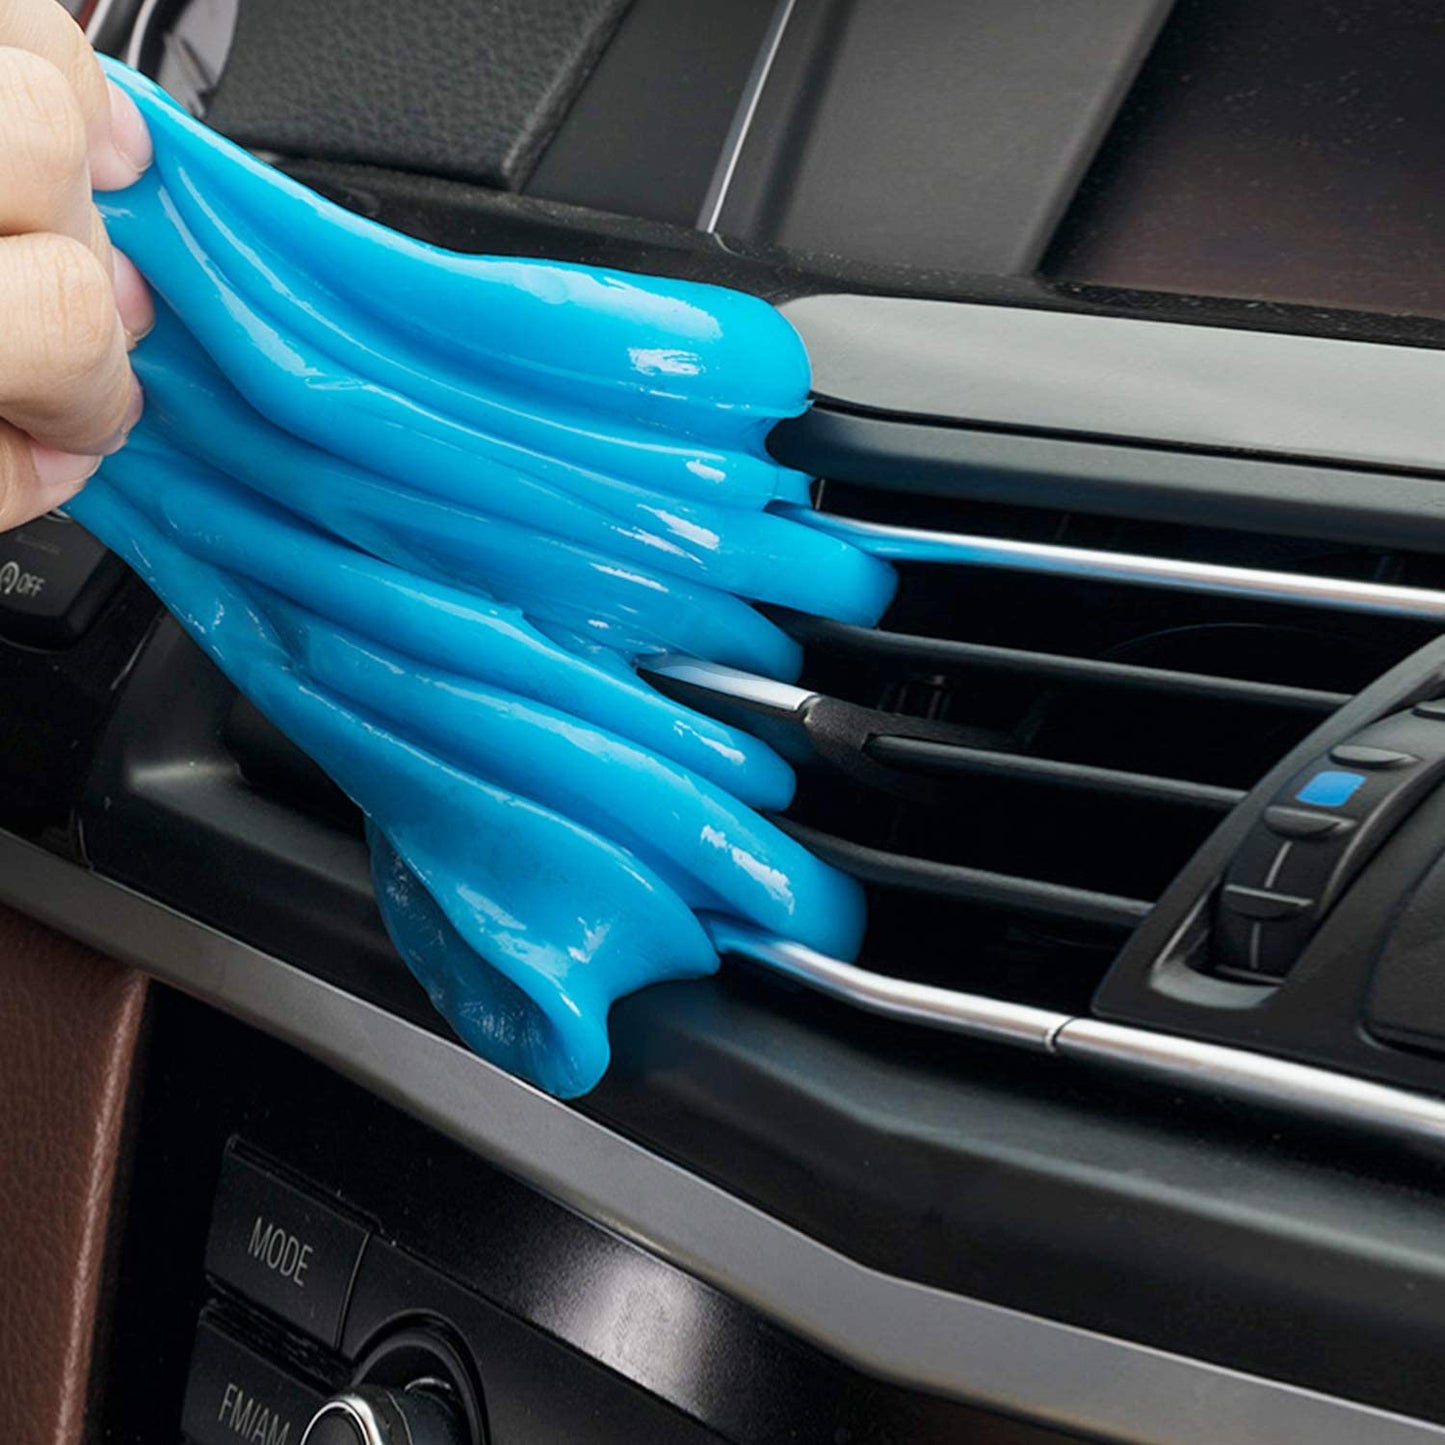 Blue colored cleaning gel being used to clean a car air vent.